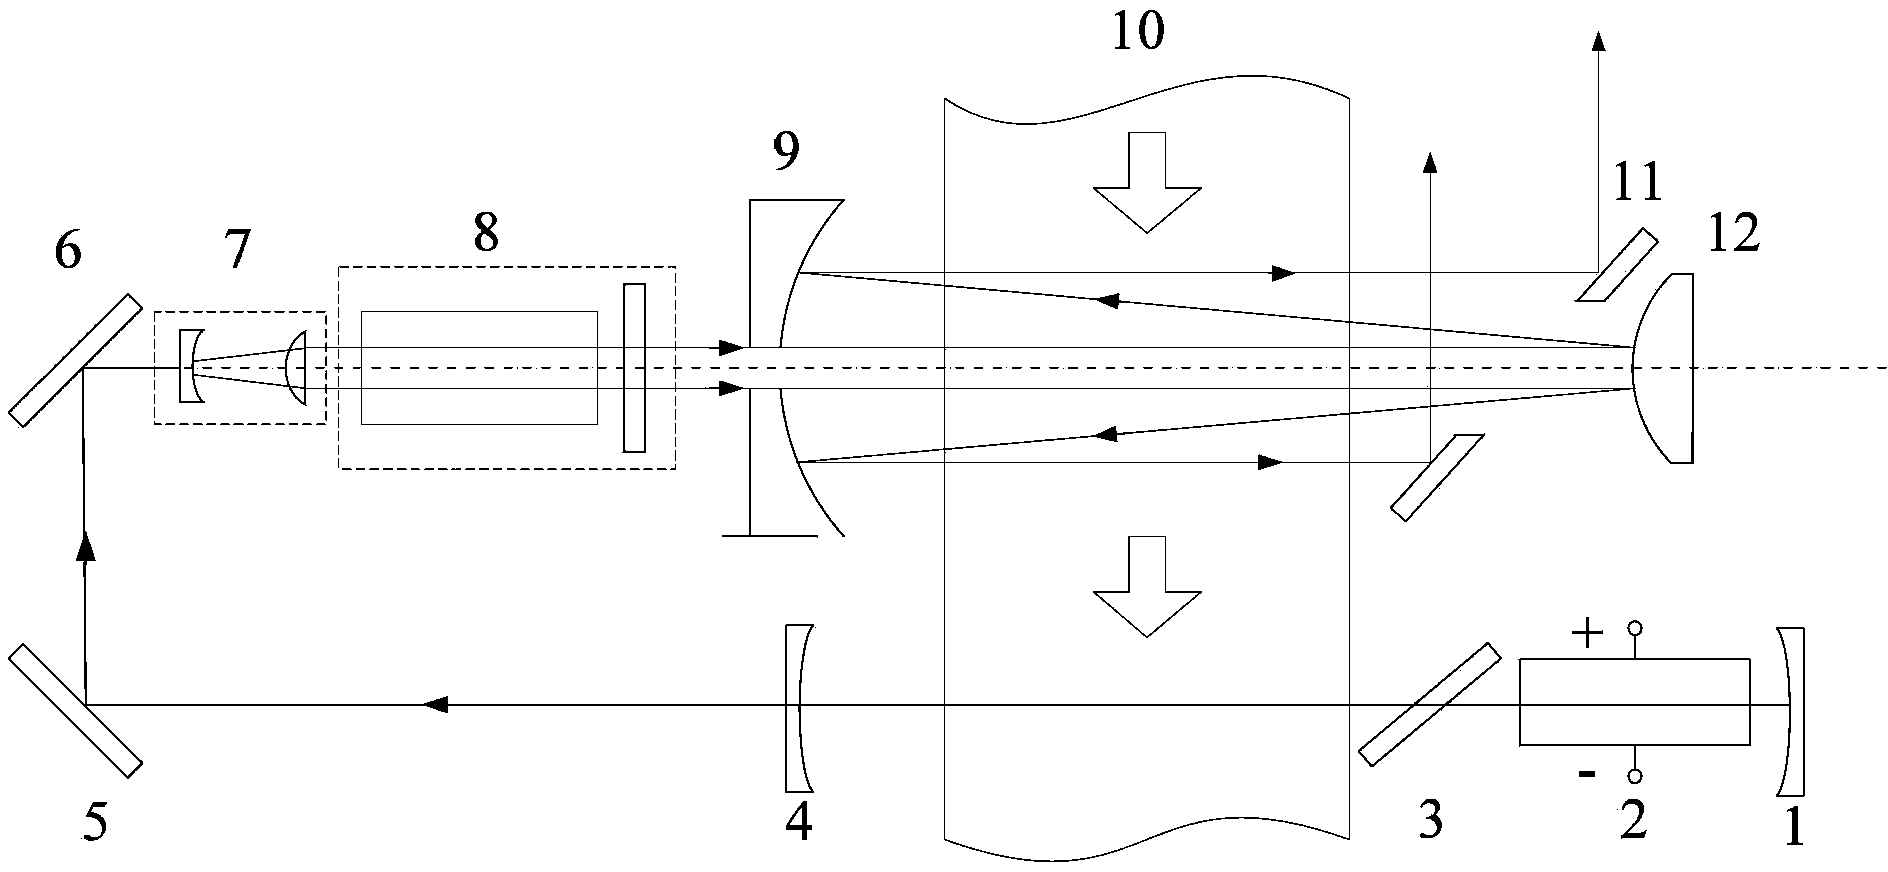 Large-power pulse air-flow chemical laser apparatus